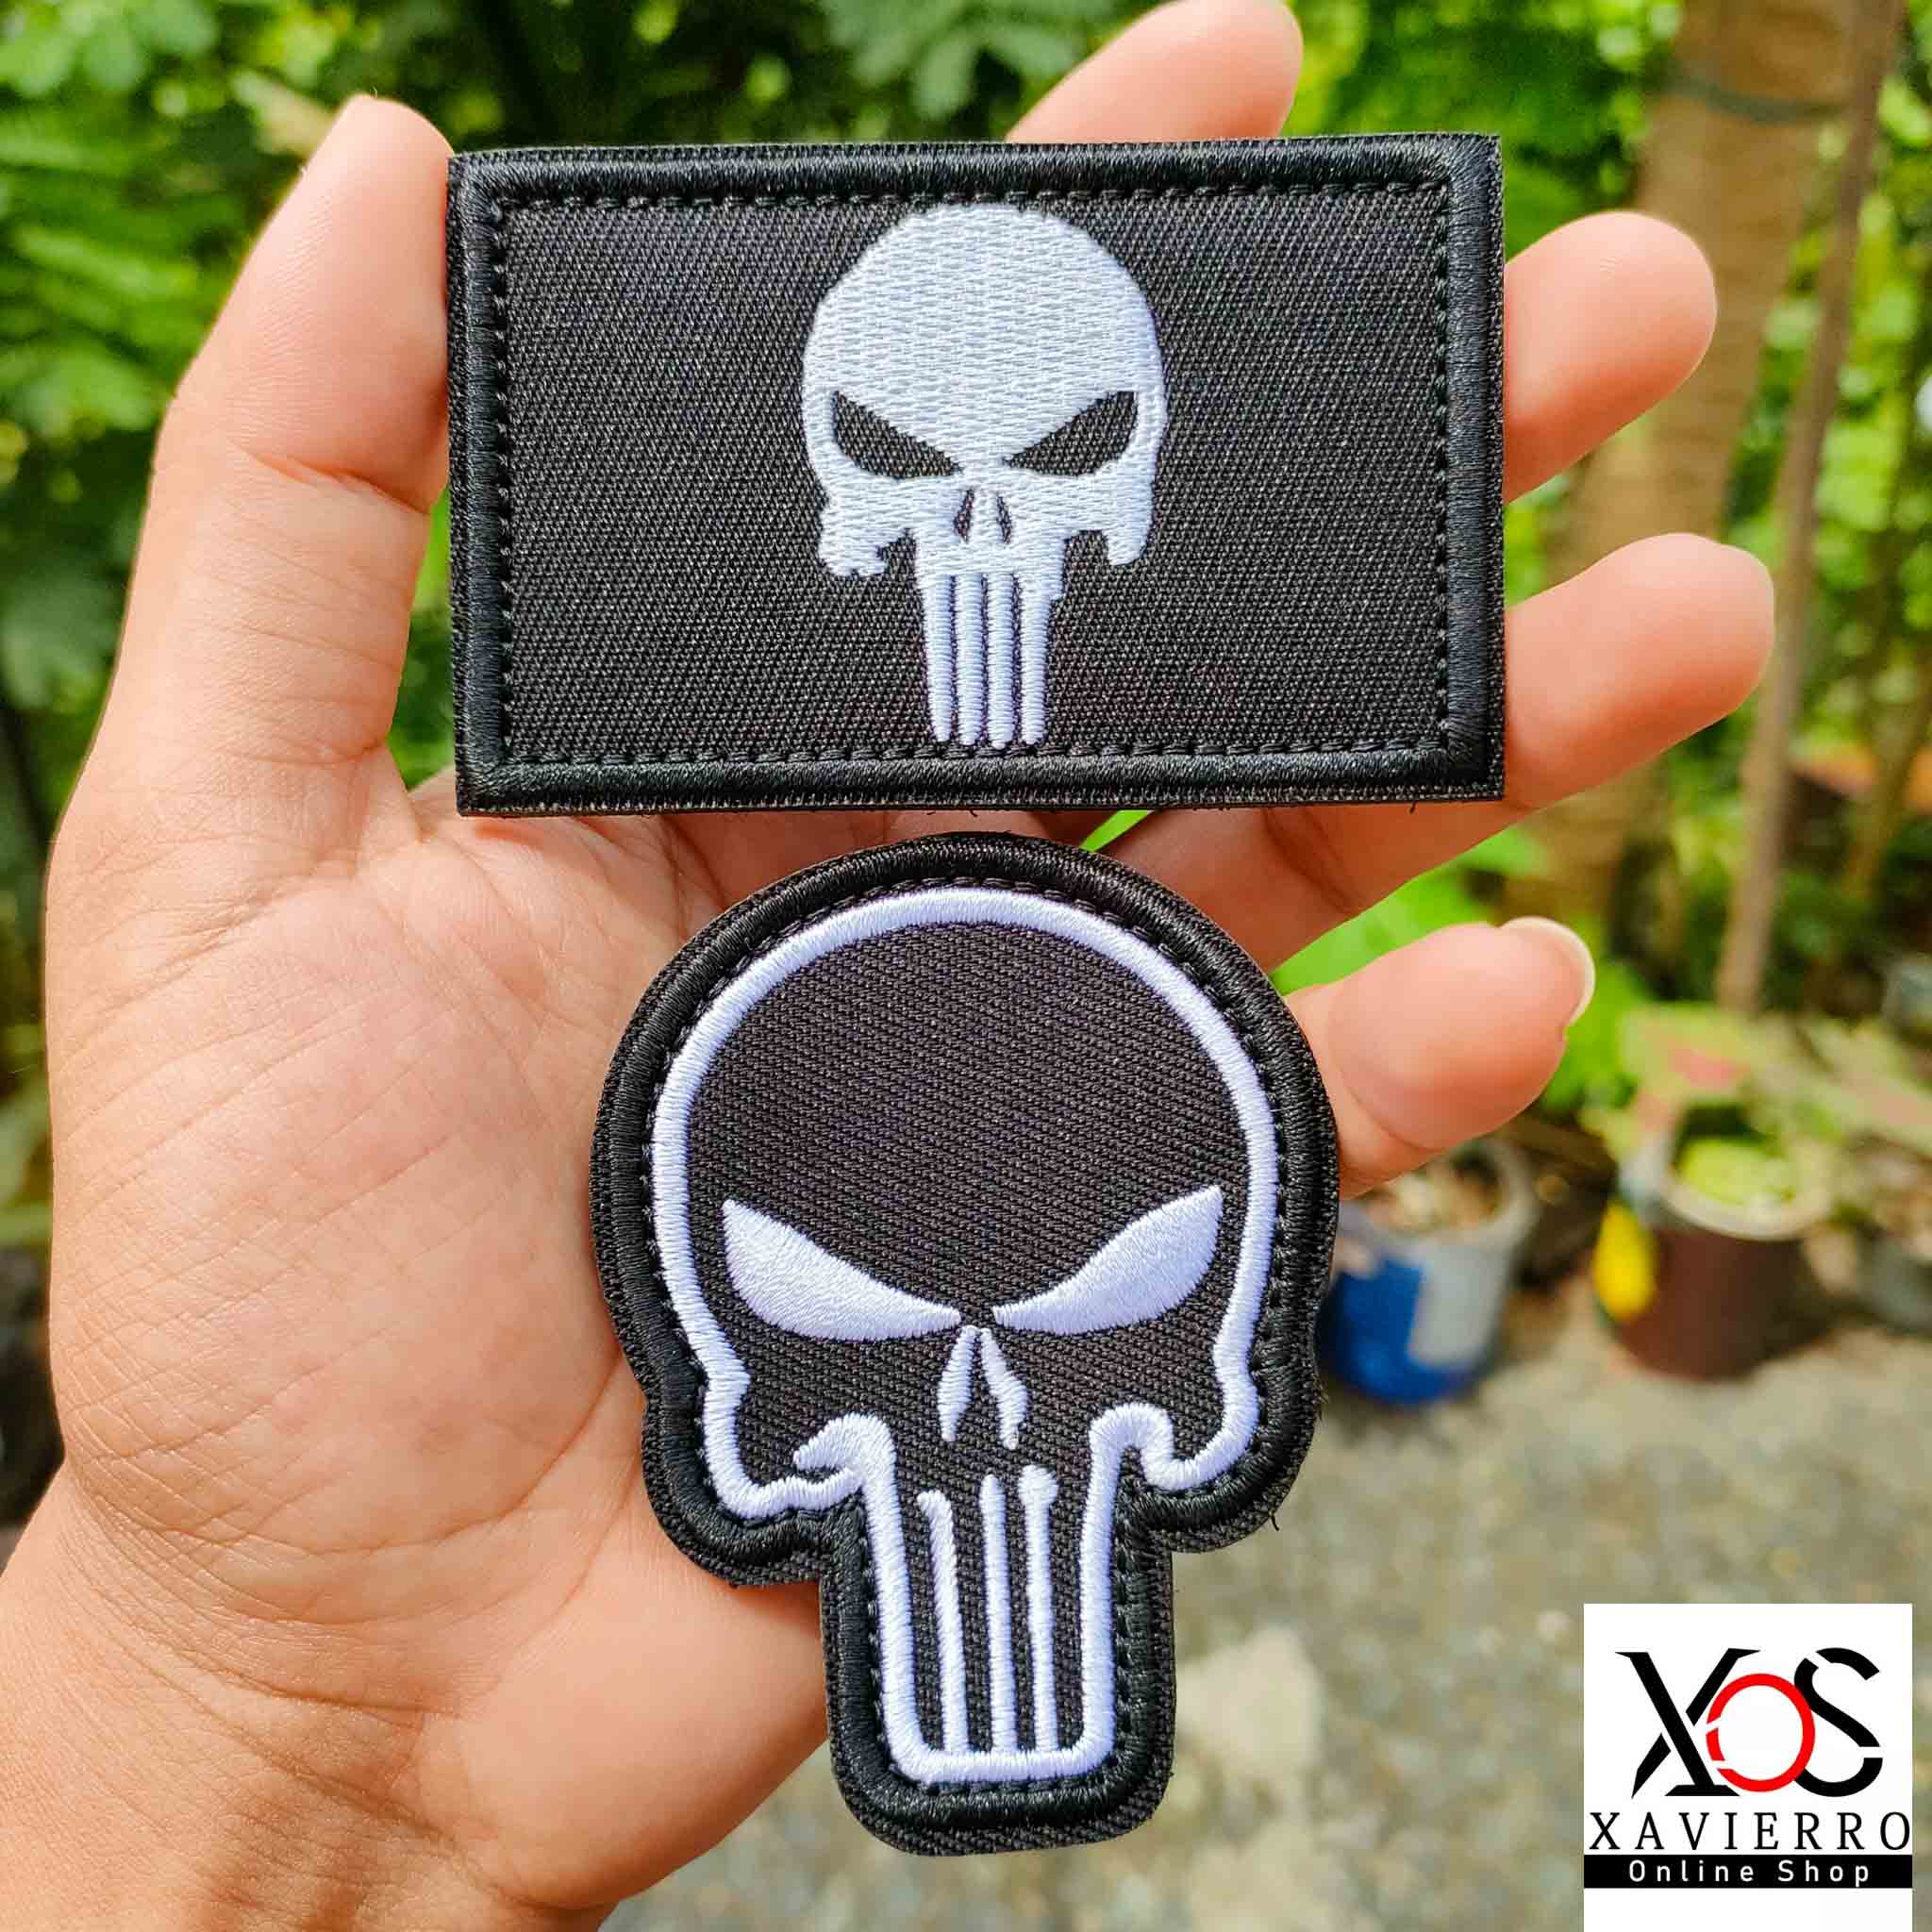 Buy Sniper Patches online